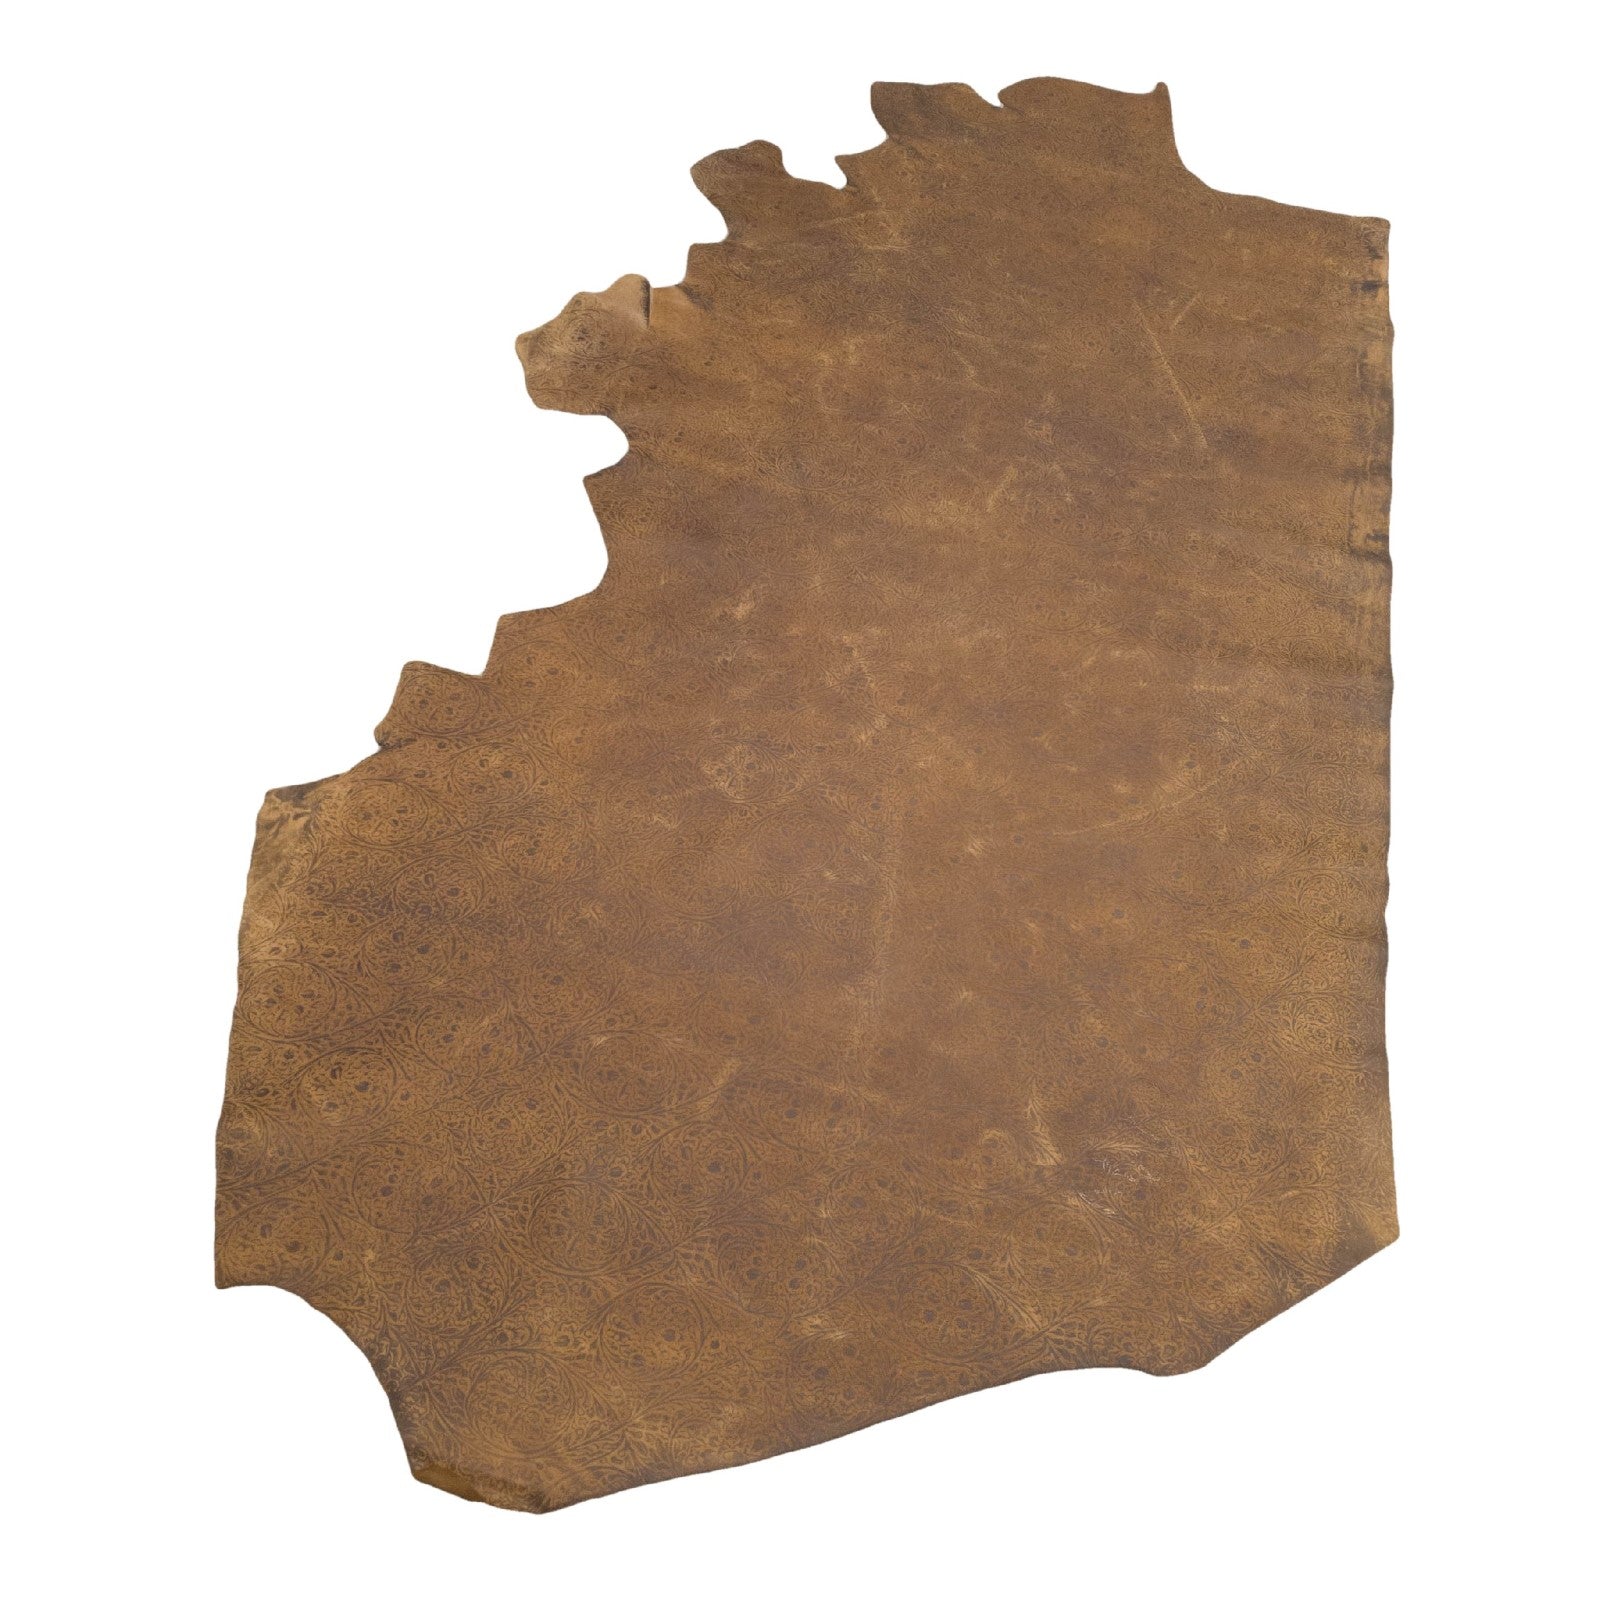 Timeless Bourbon Brown Embossed, 2-3 oz, 24-29 Sq Ft, Cow Sides, 27-29 | The Leather Guy